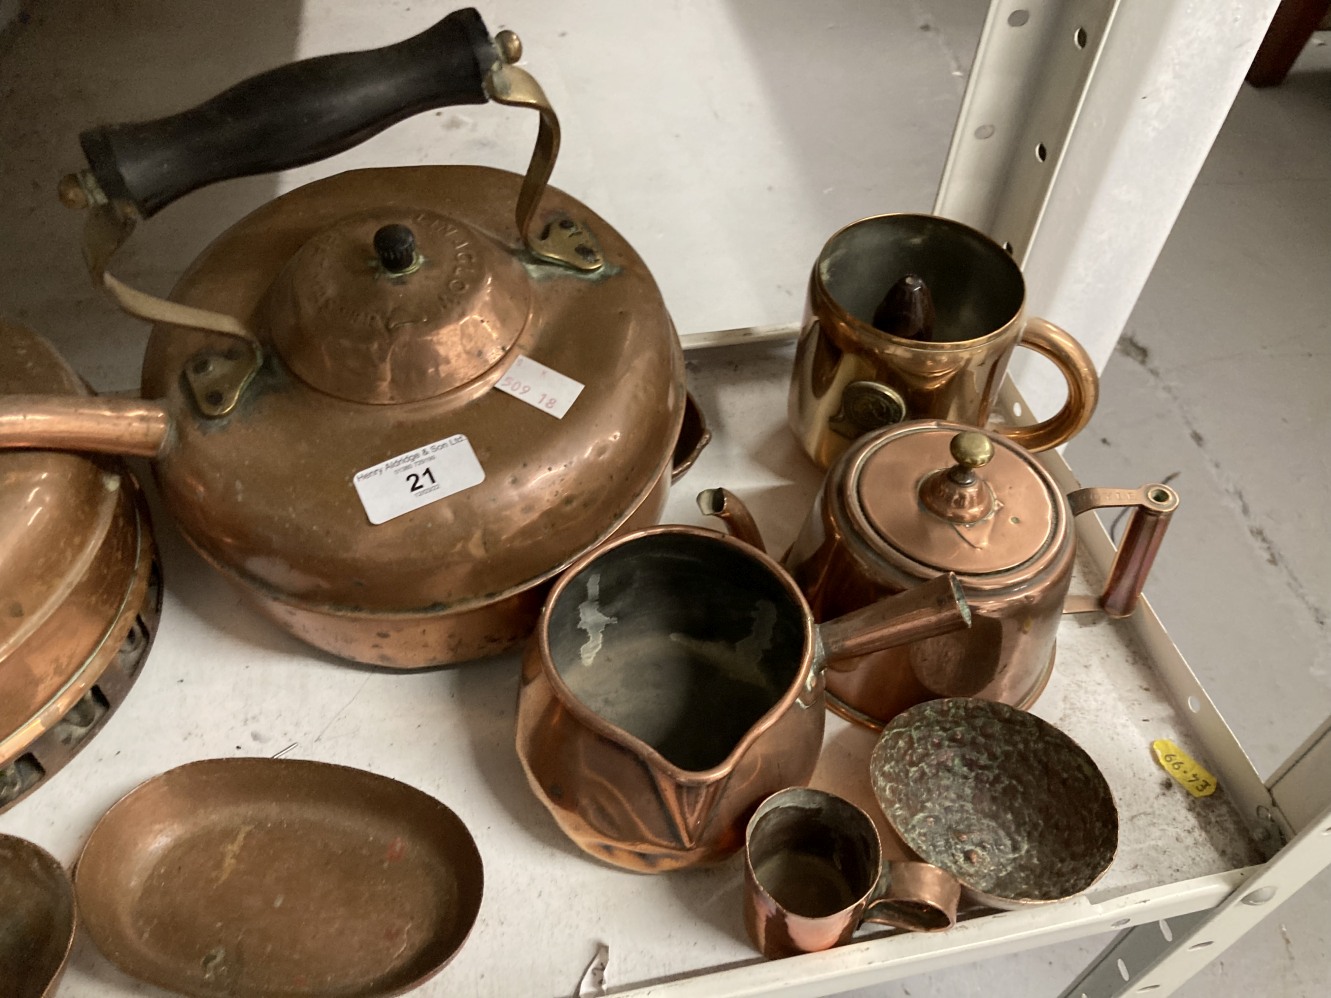 19th/20th cent. Metalware: Copper kettles x 2, chocolate and other pots, decorative mugs x 2, dishes - Bild 3 aus 3